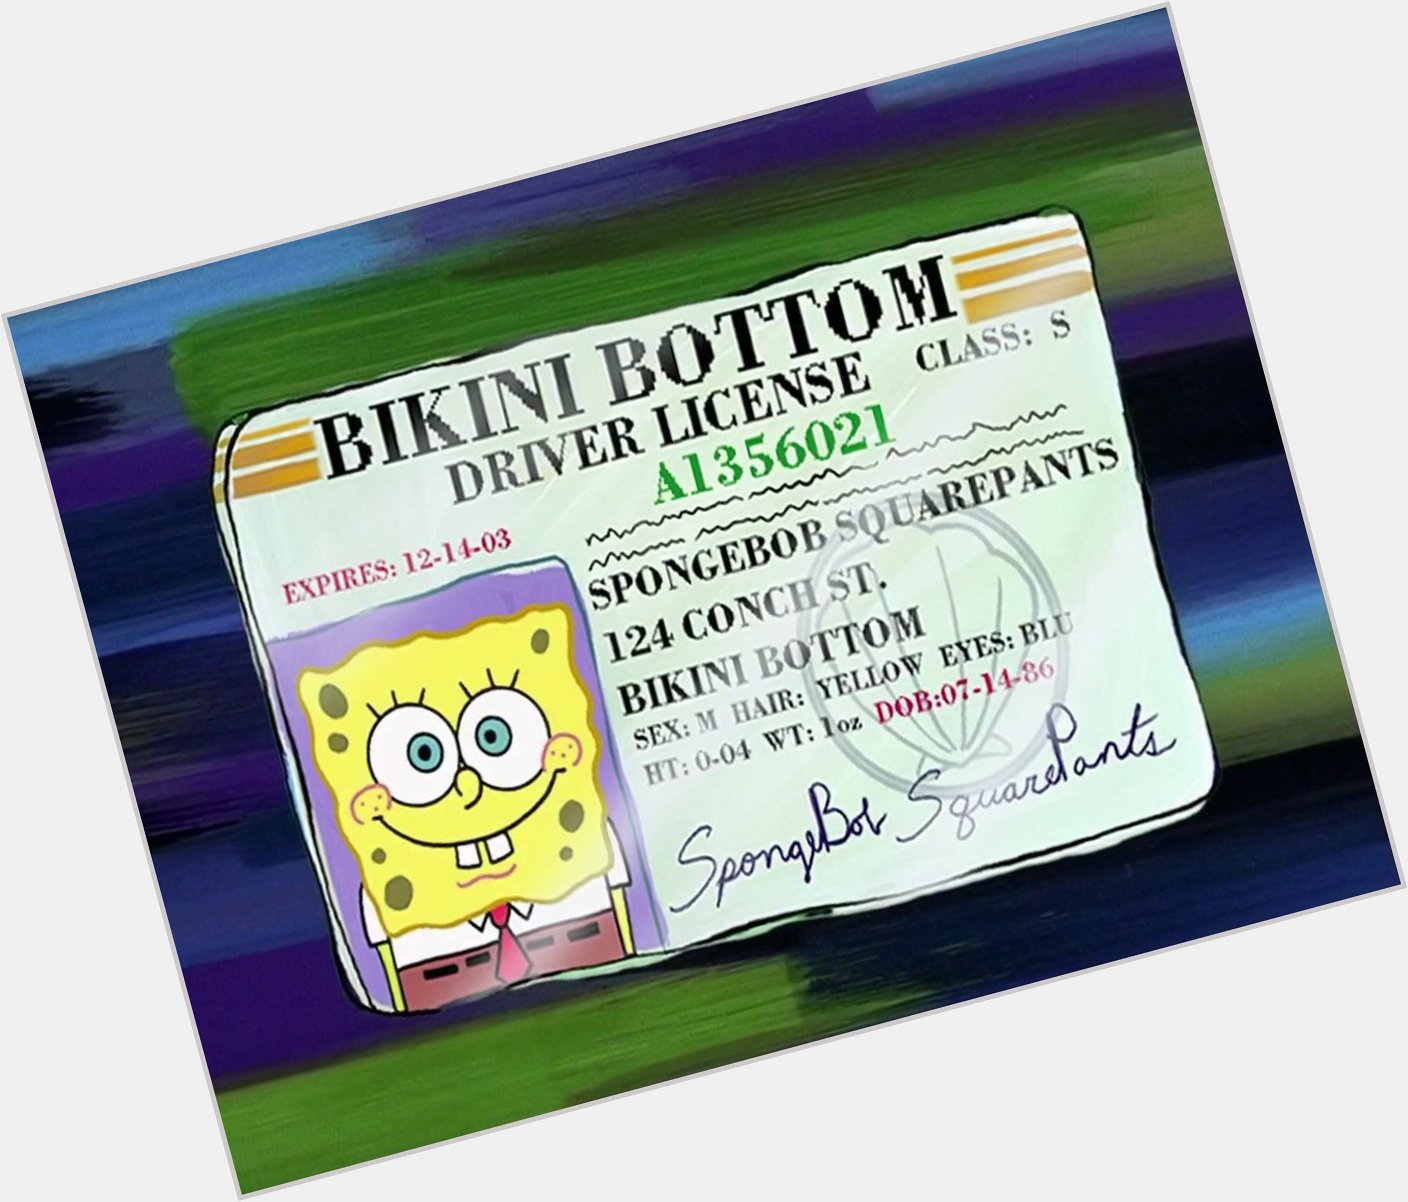 Happy 32nd Birthday to the one and only, Spongebob Squarepants! Sorry about all those straws in the ocean... 